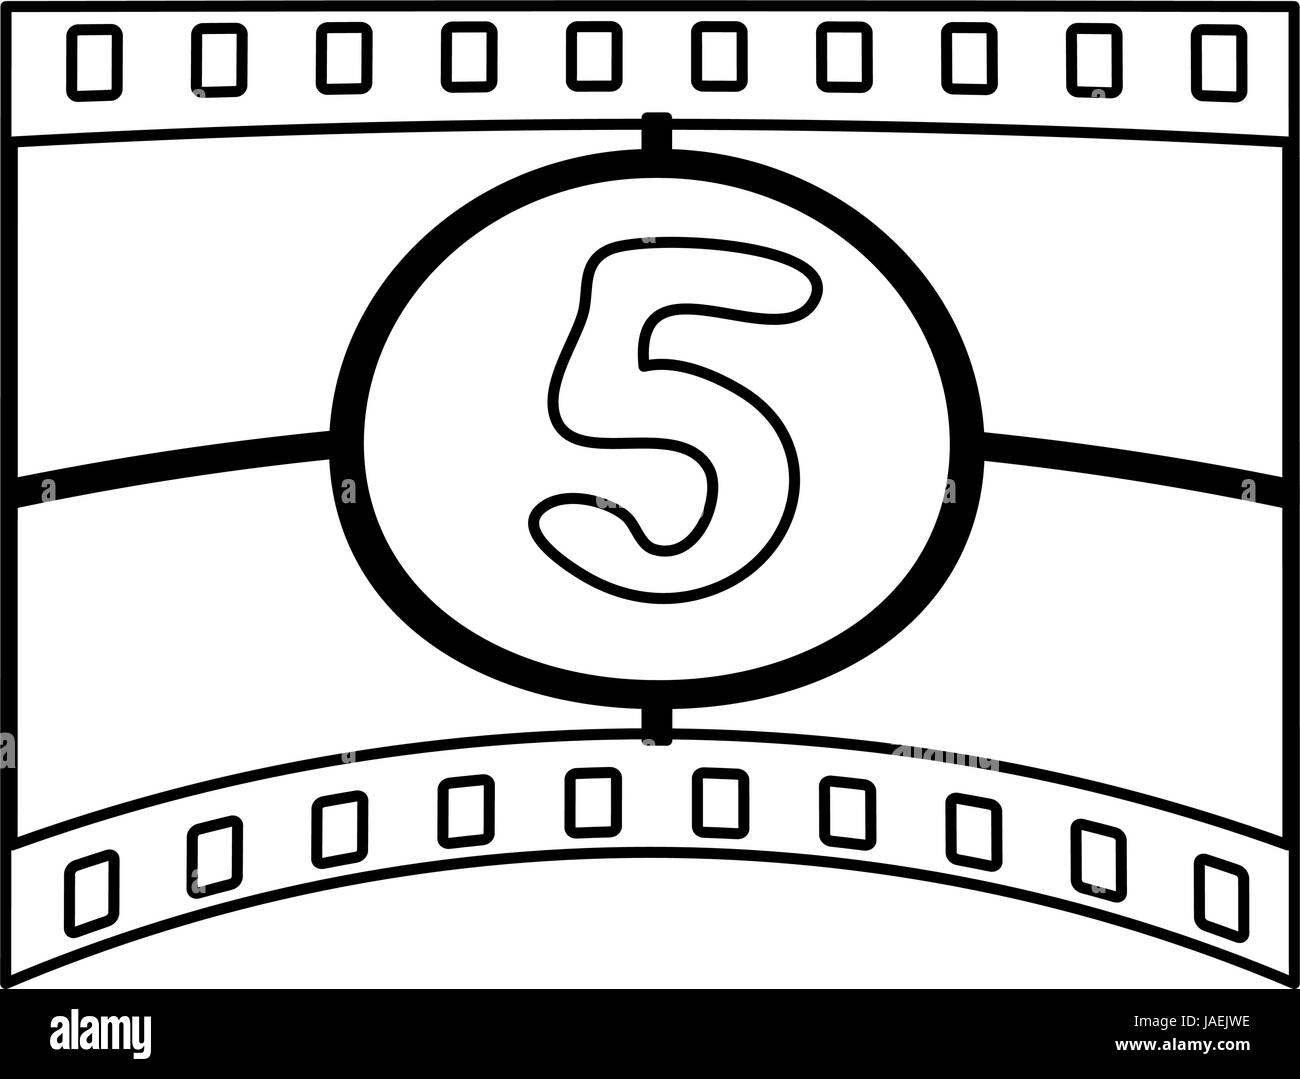 video tape segment with number countdown  icon image  Stock Vector